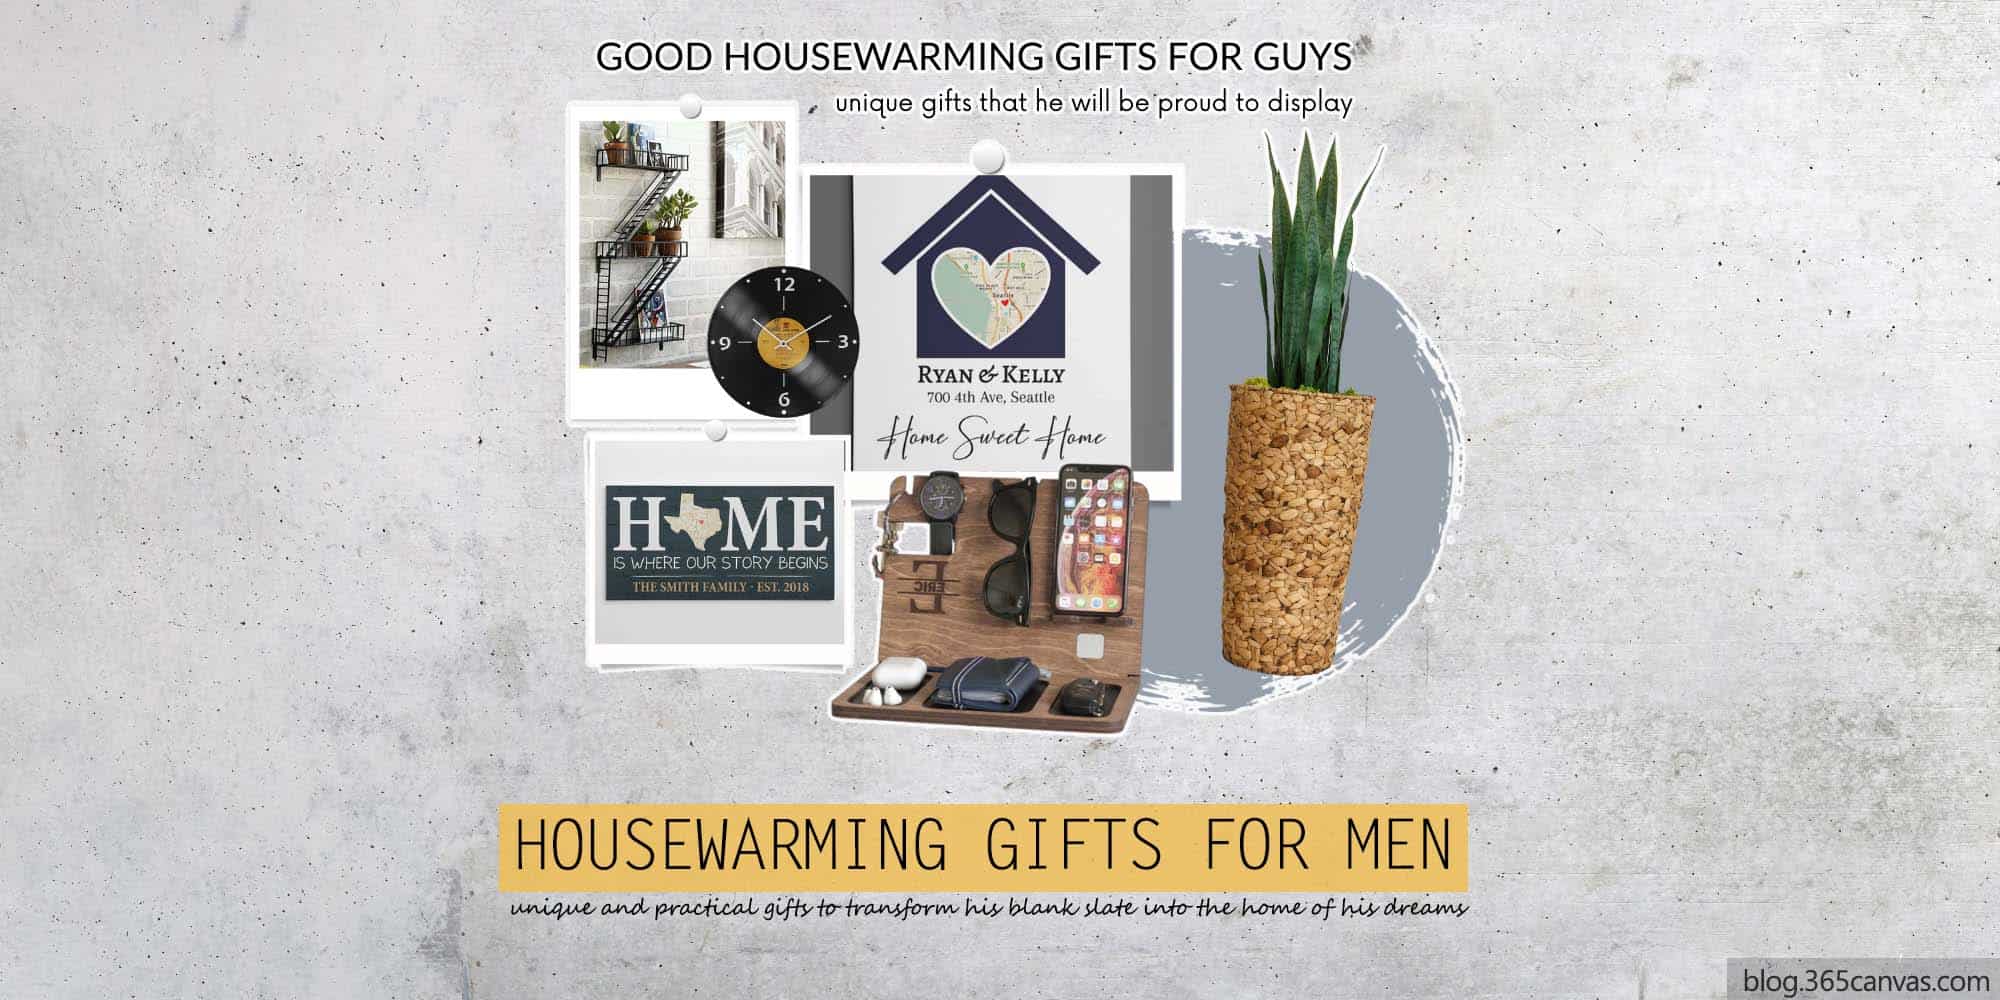 The Best Housewarming Gifts on Amazon Practical Unique  Funny